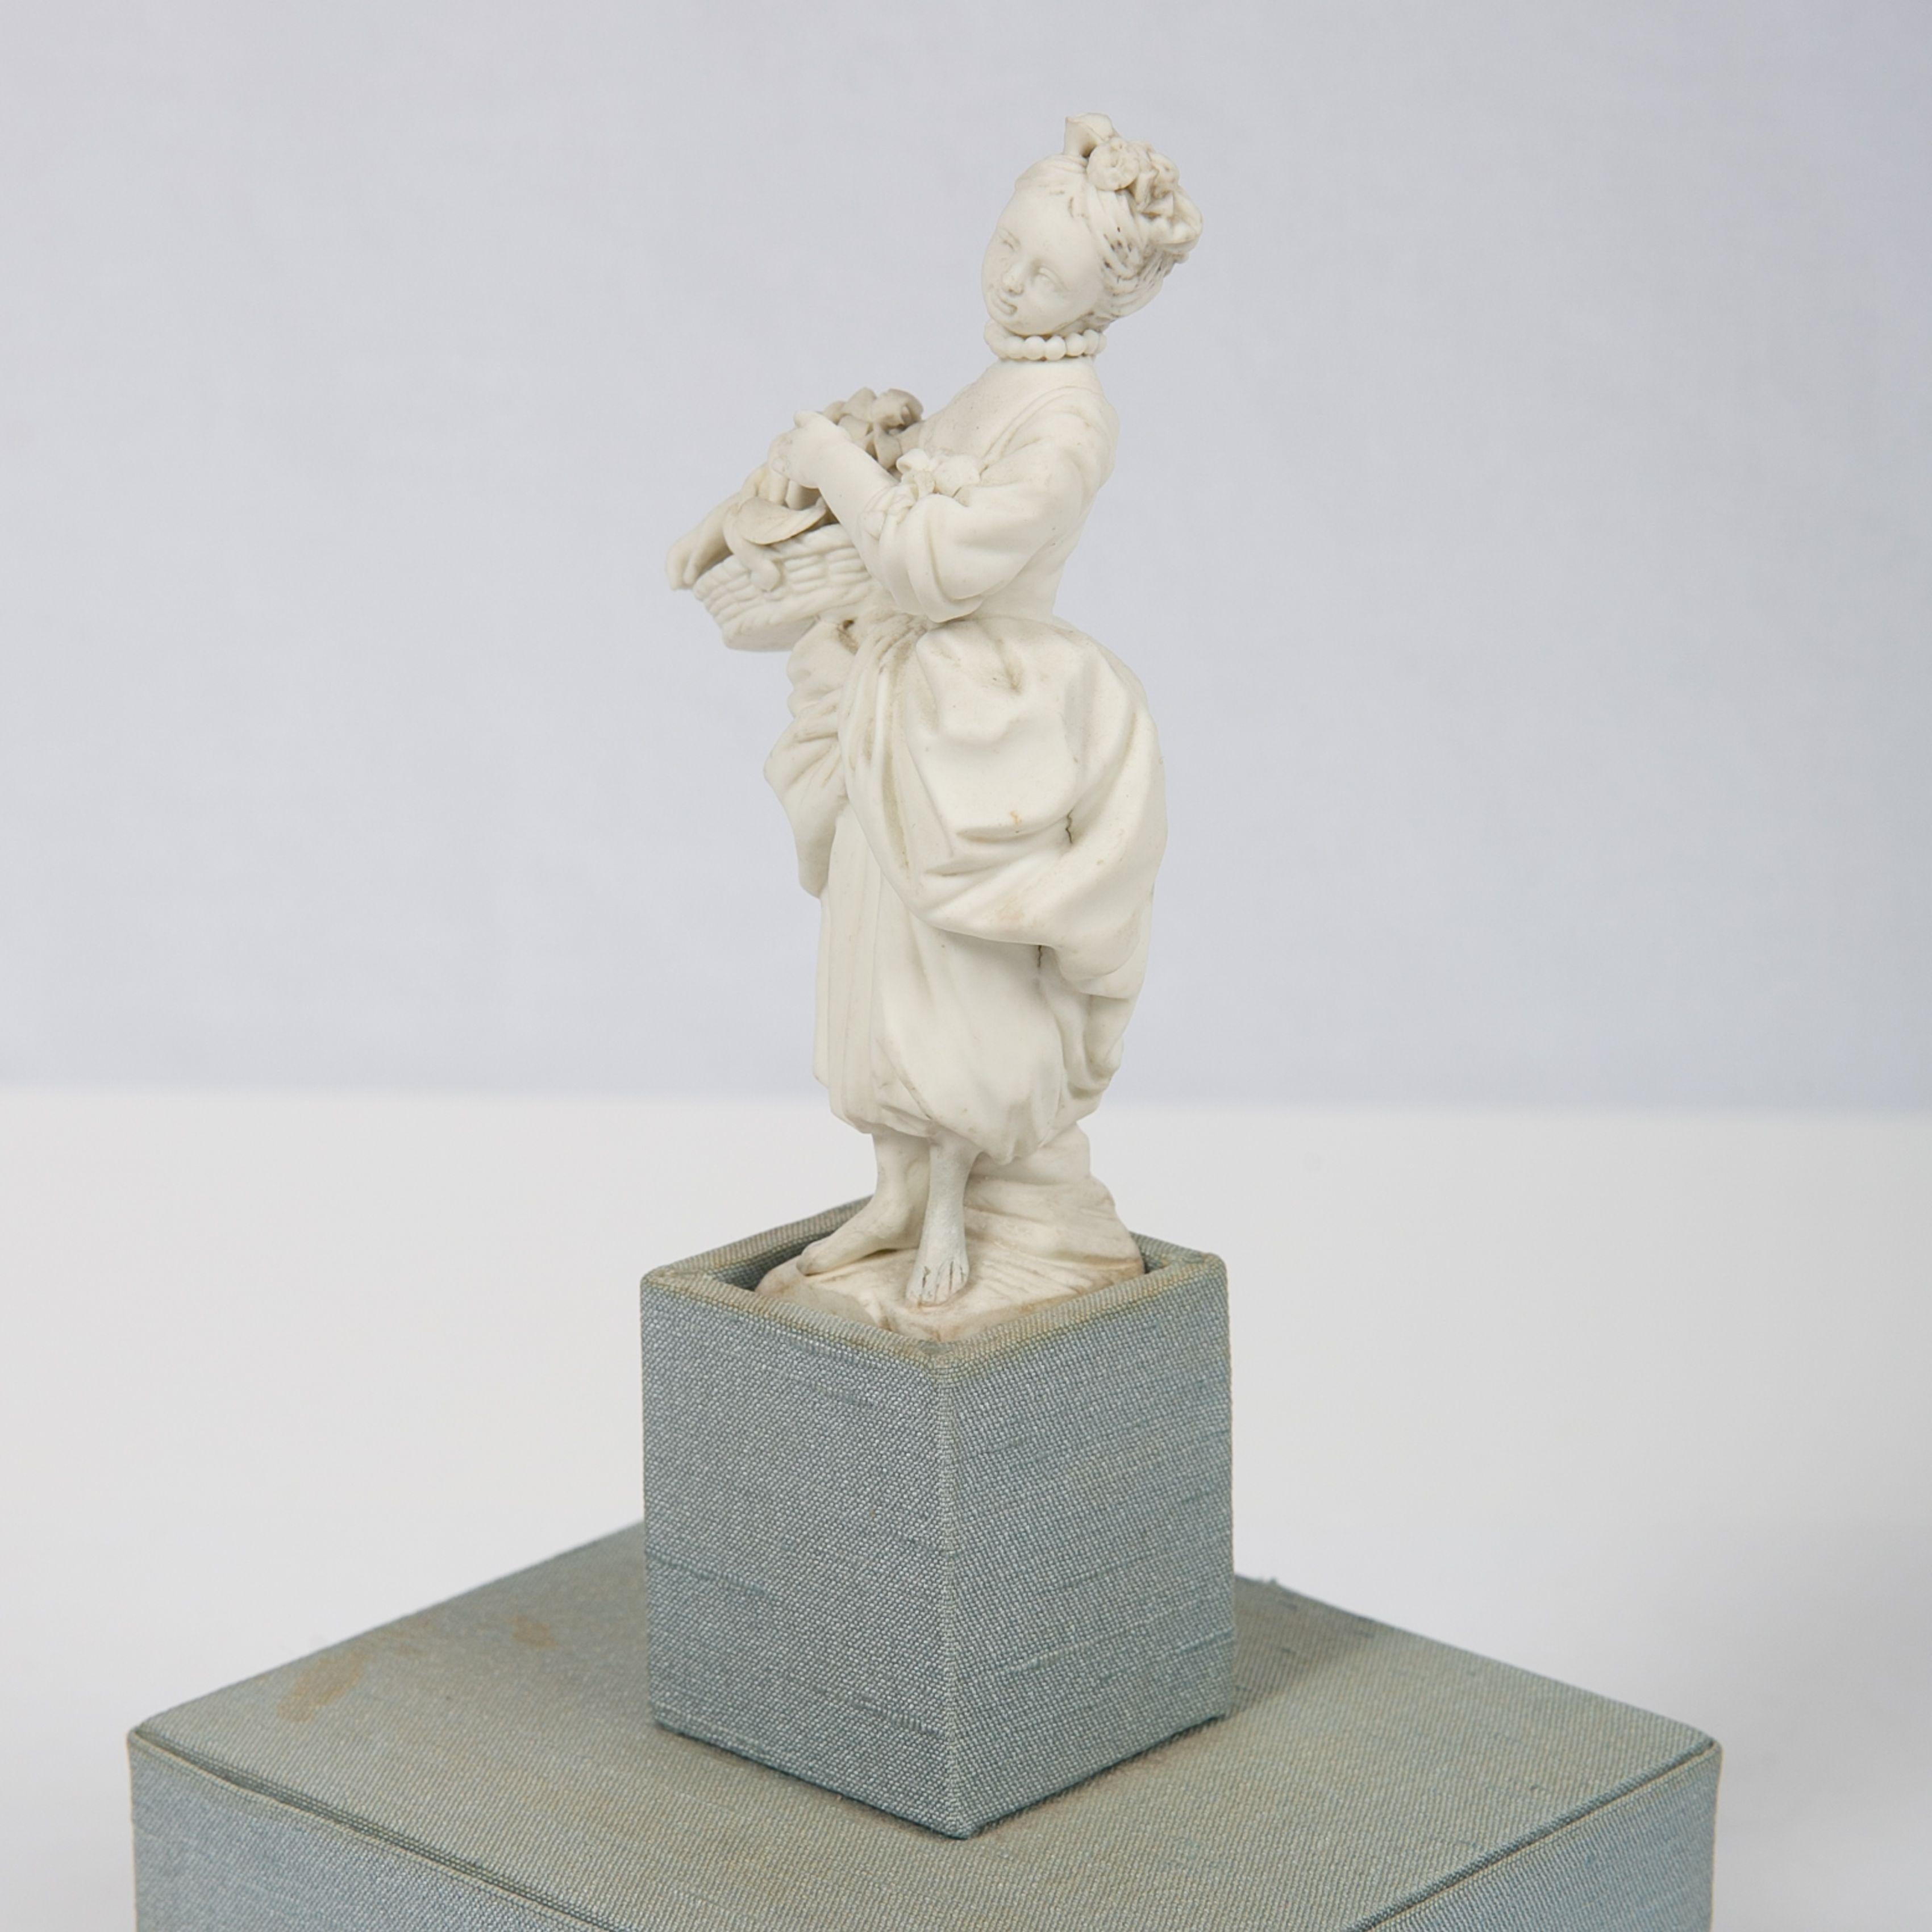 18th Century and Earlier Small Bisque Figure of Girl Made by Mennecy in 18th Century France